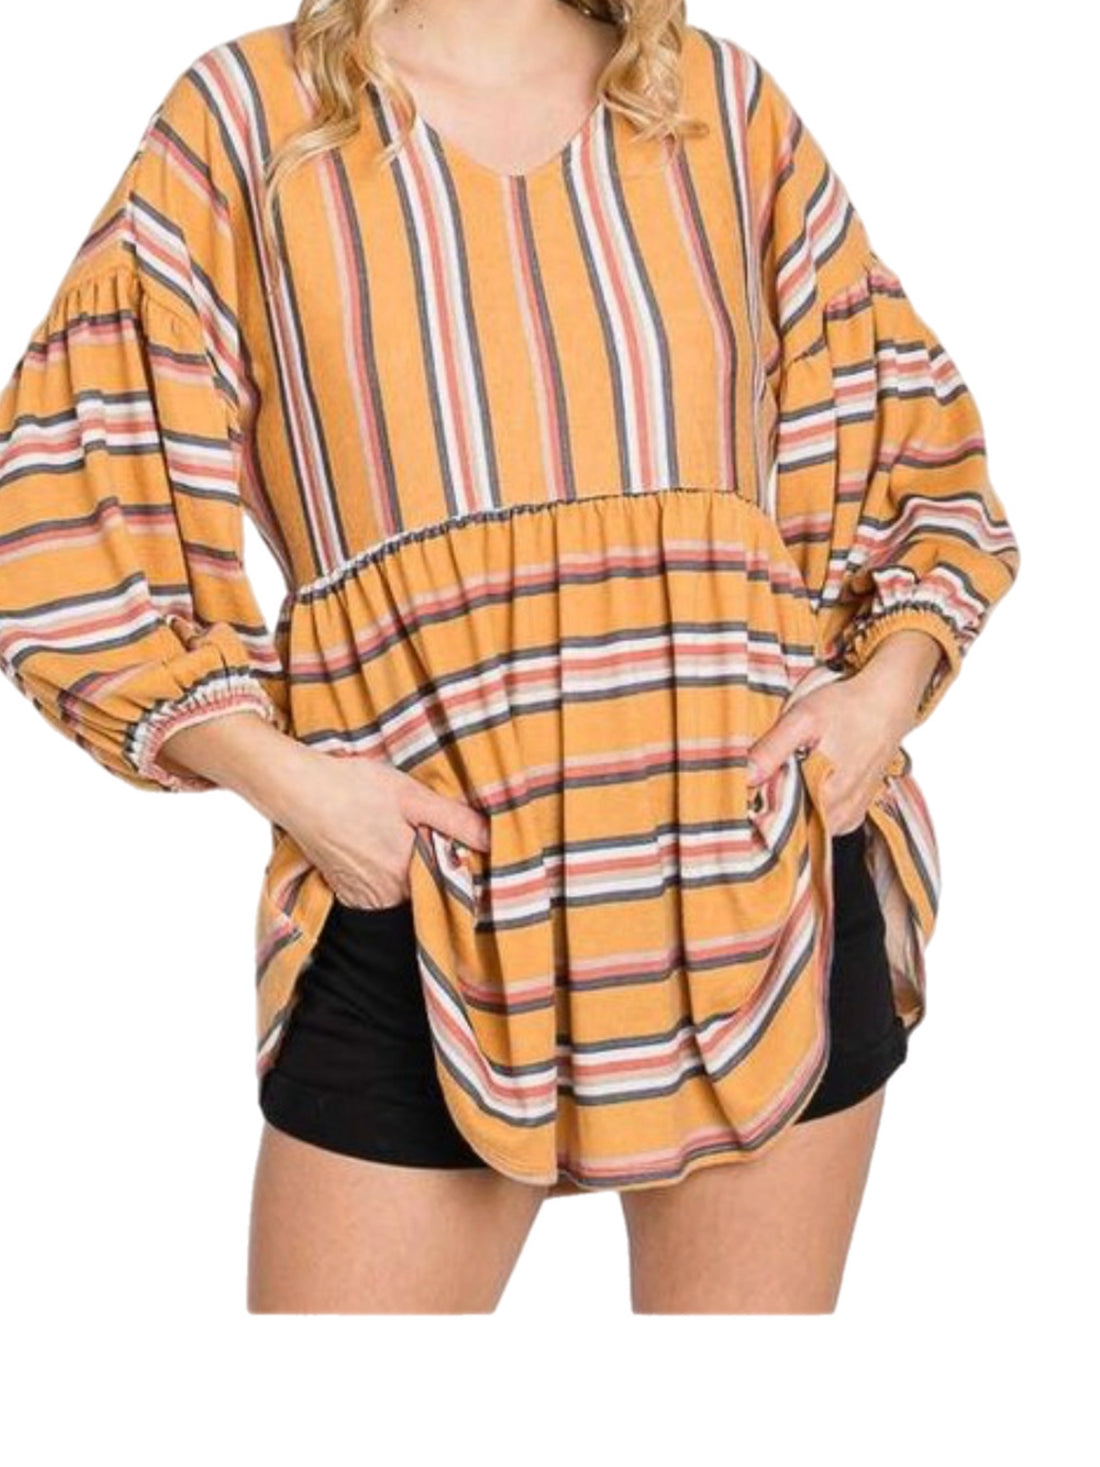 Yellow Striped Baby Doll Top